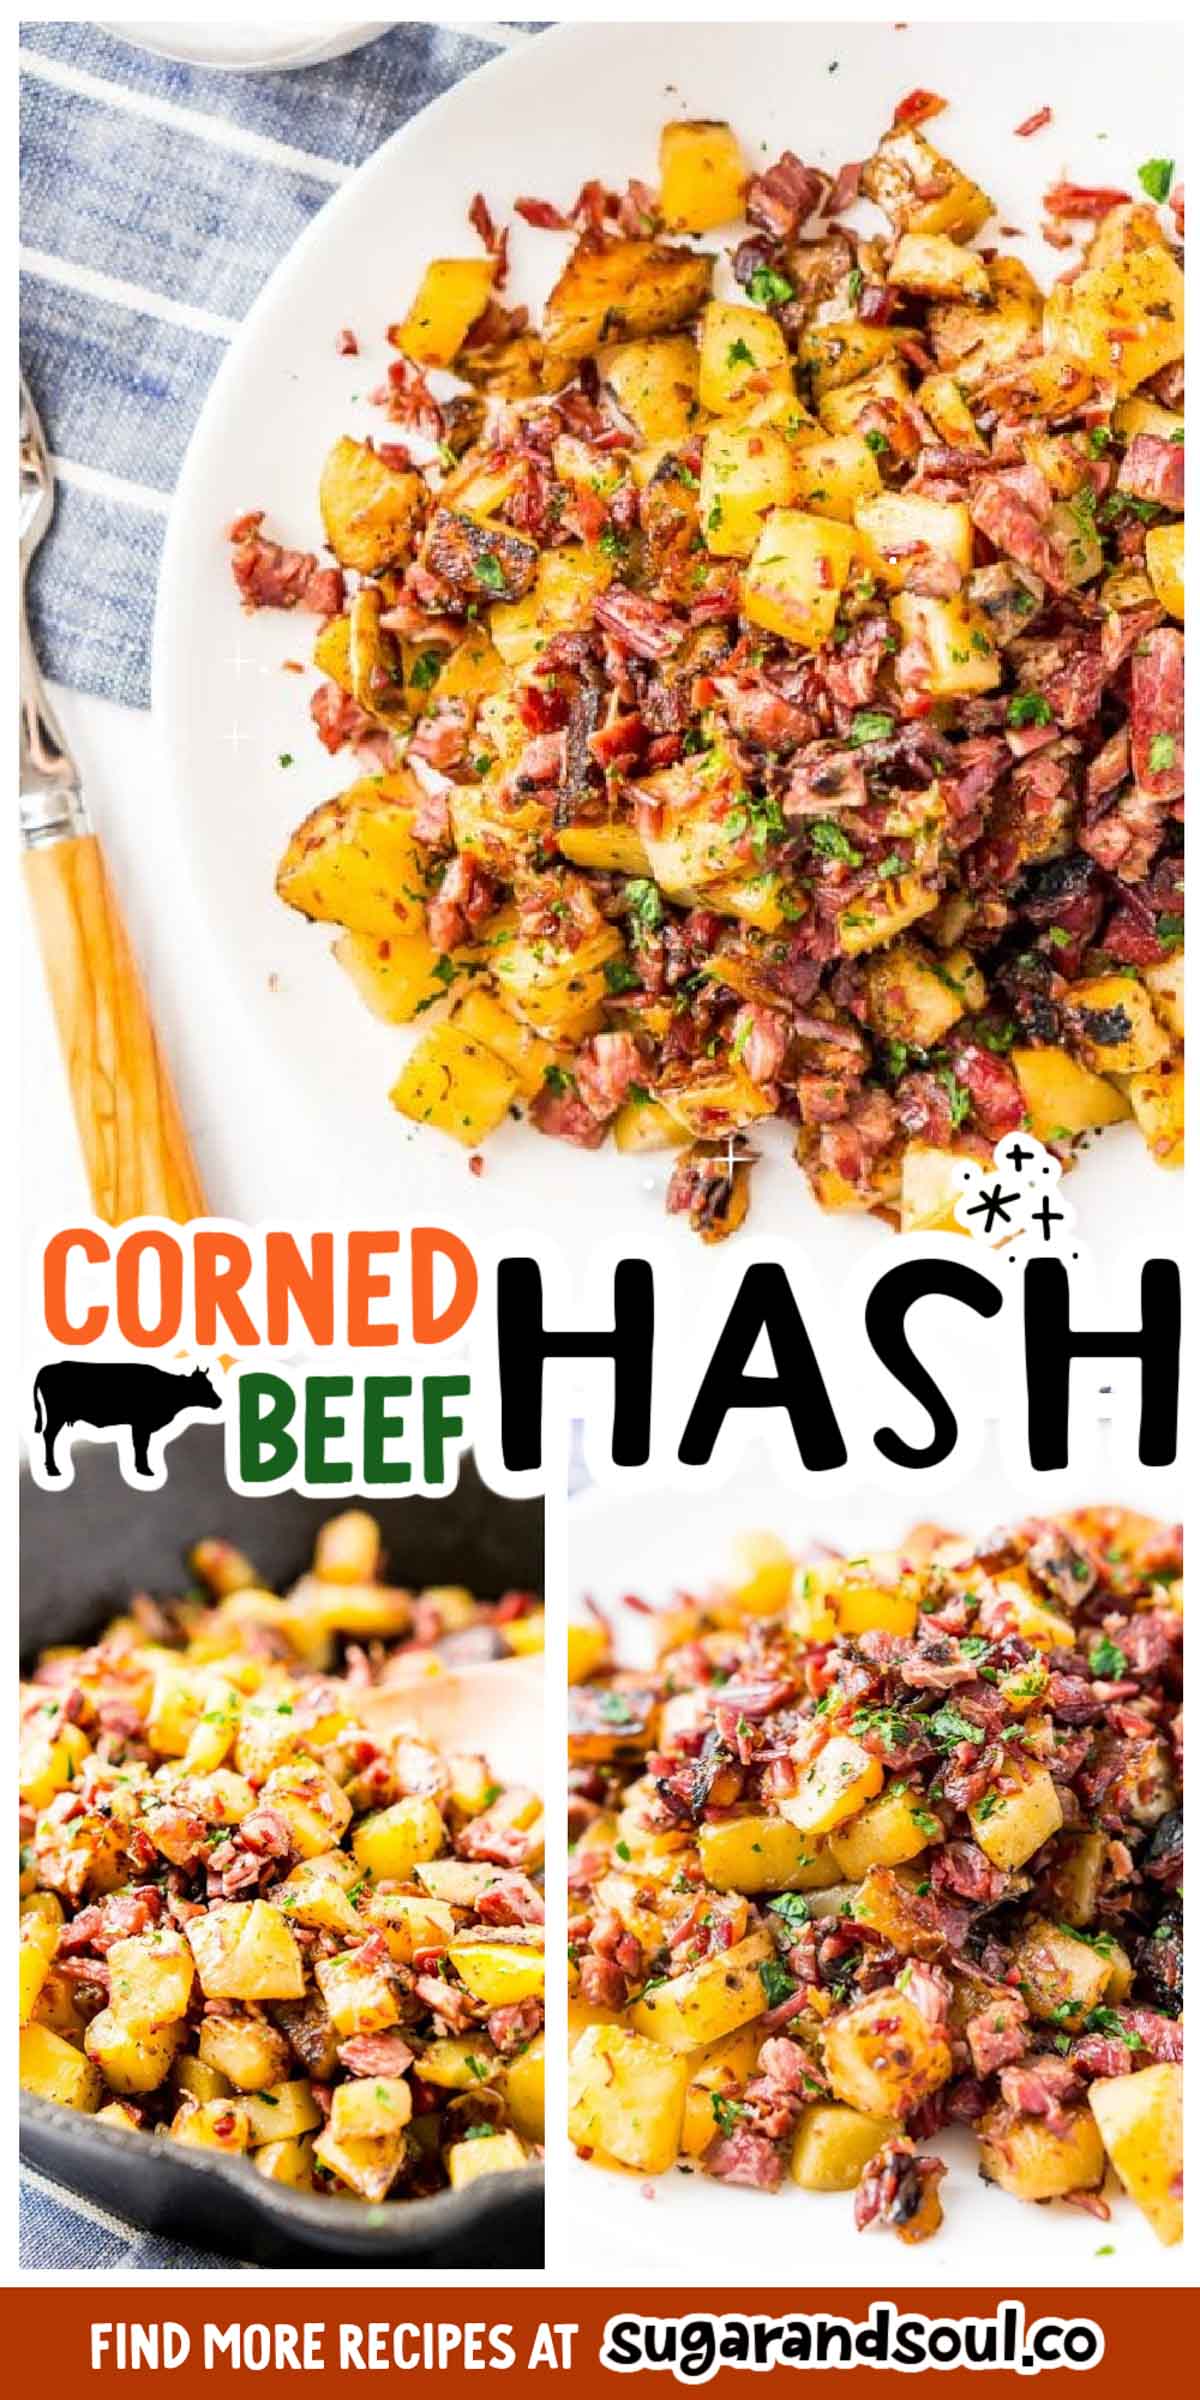 This Corned Beef Hash is a salty and delicious breakfast dish the whole family will love! A simple hash made with brisket, potatoes, onions, butter, thyme, and pepper and a great way to use up leftover Corned Beef! via @sugarandsoulco